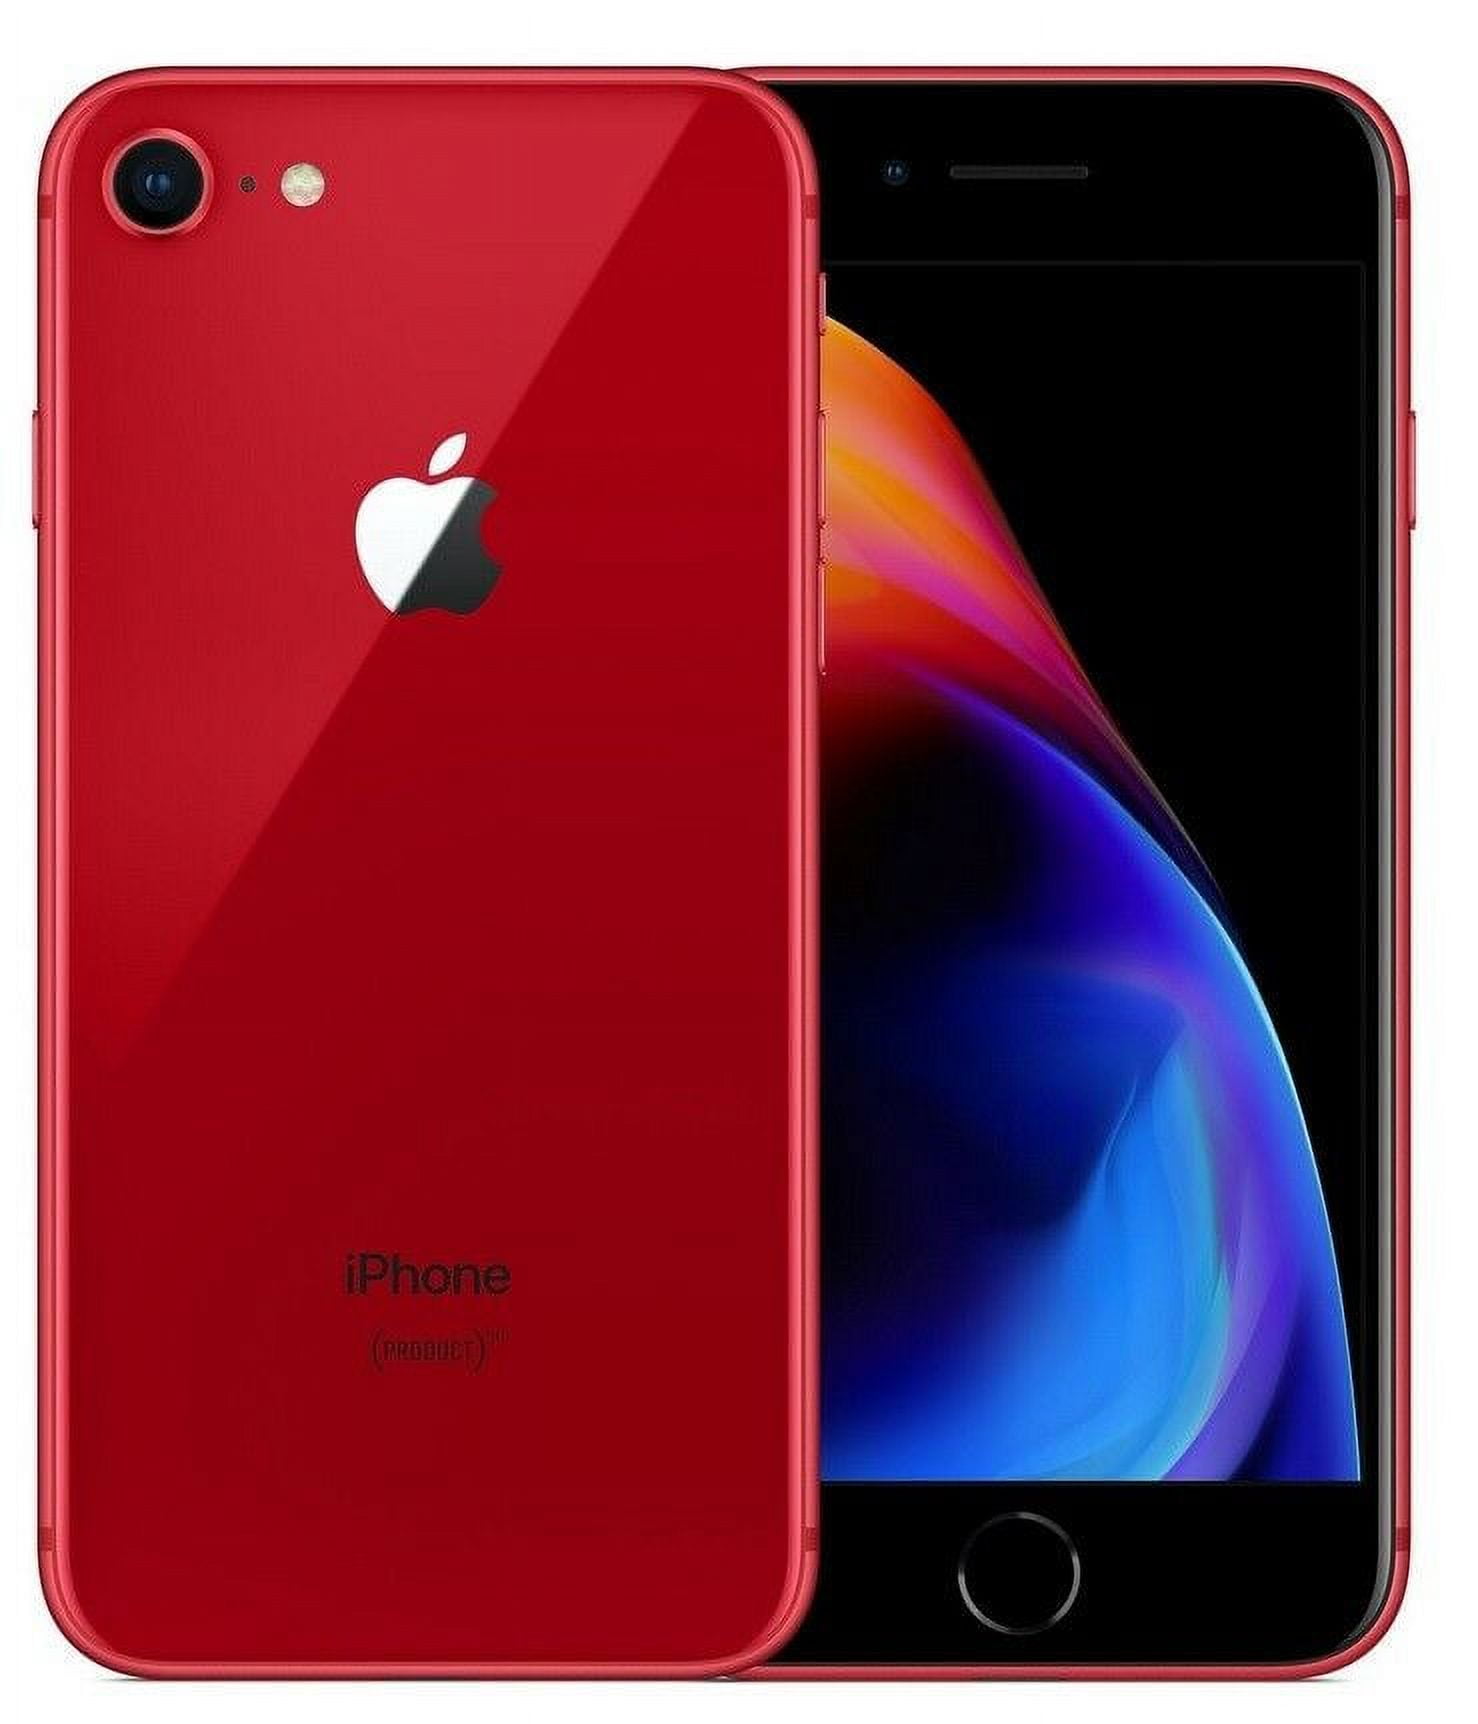 Apple iPhone 8 A1905 64GB Red (US Model) - Factory Unlocked Cell Phone -  Very Good Condition